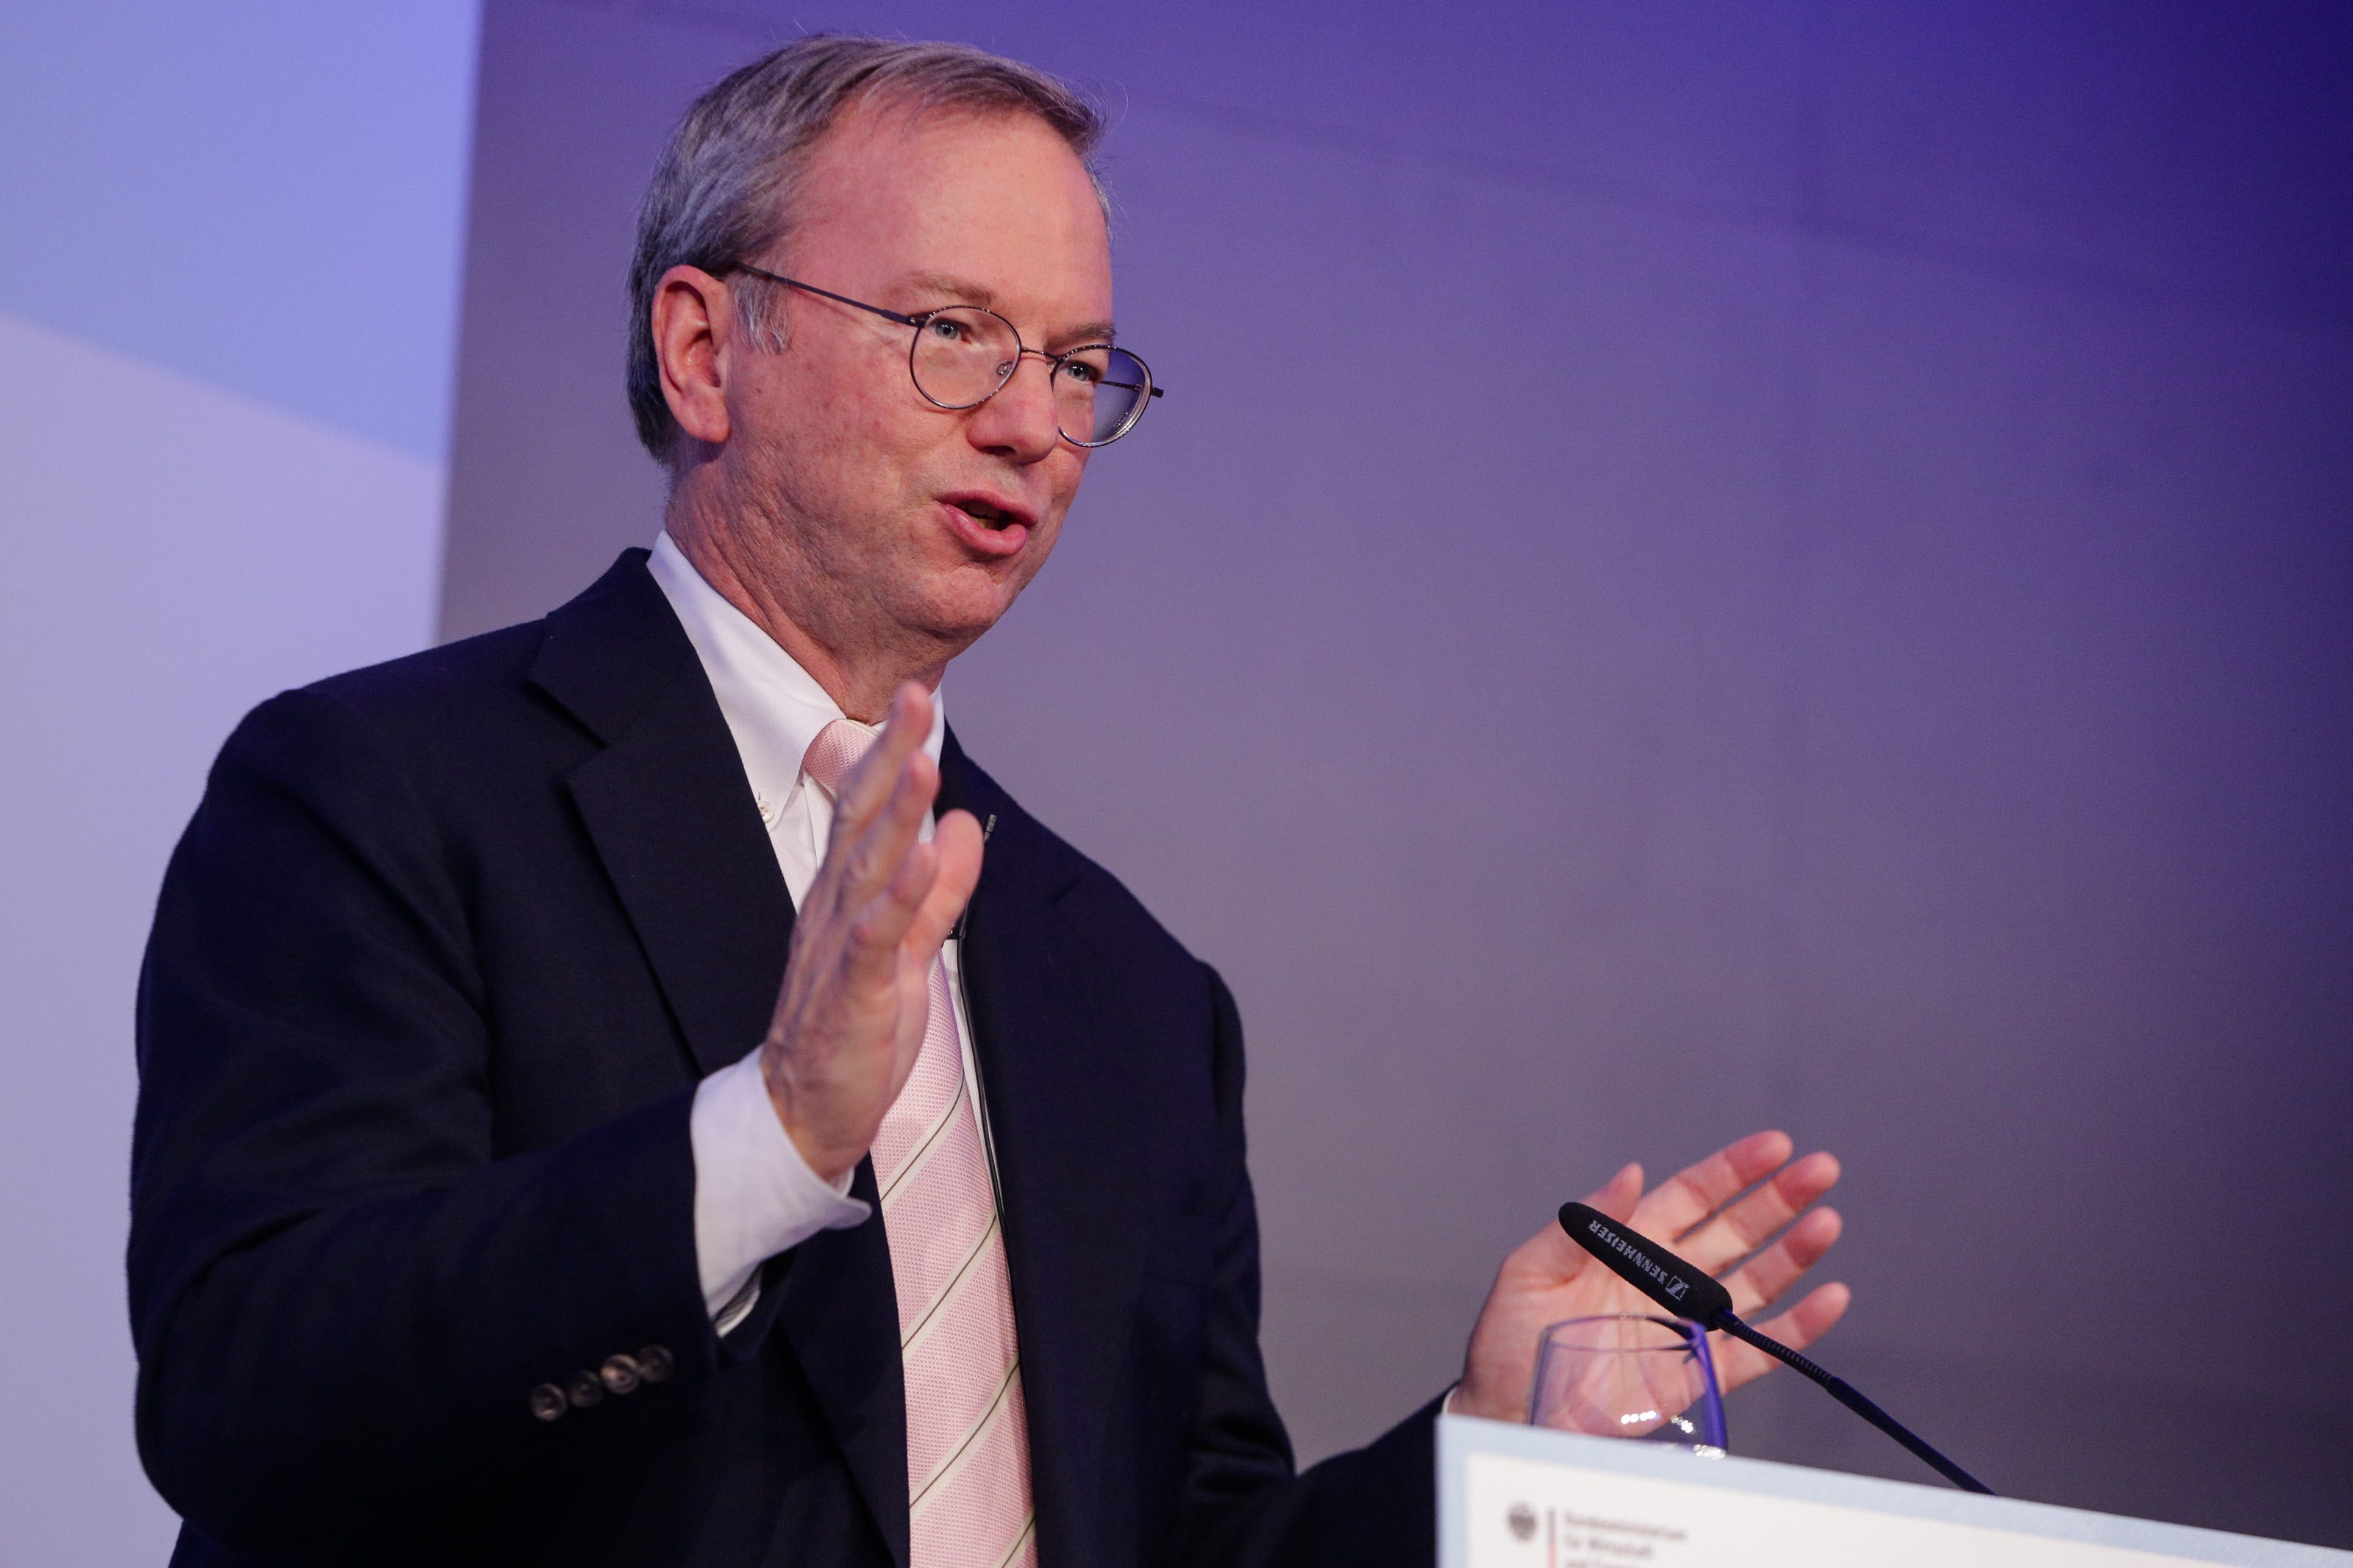 microsoft, eric schmidt says china trails behind the us in ai for these 4 reasons